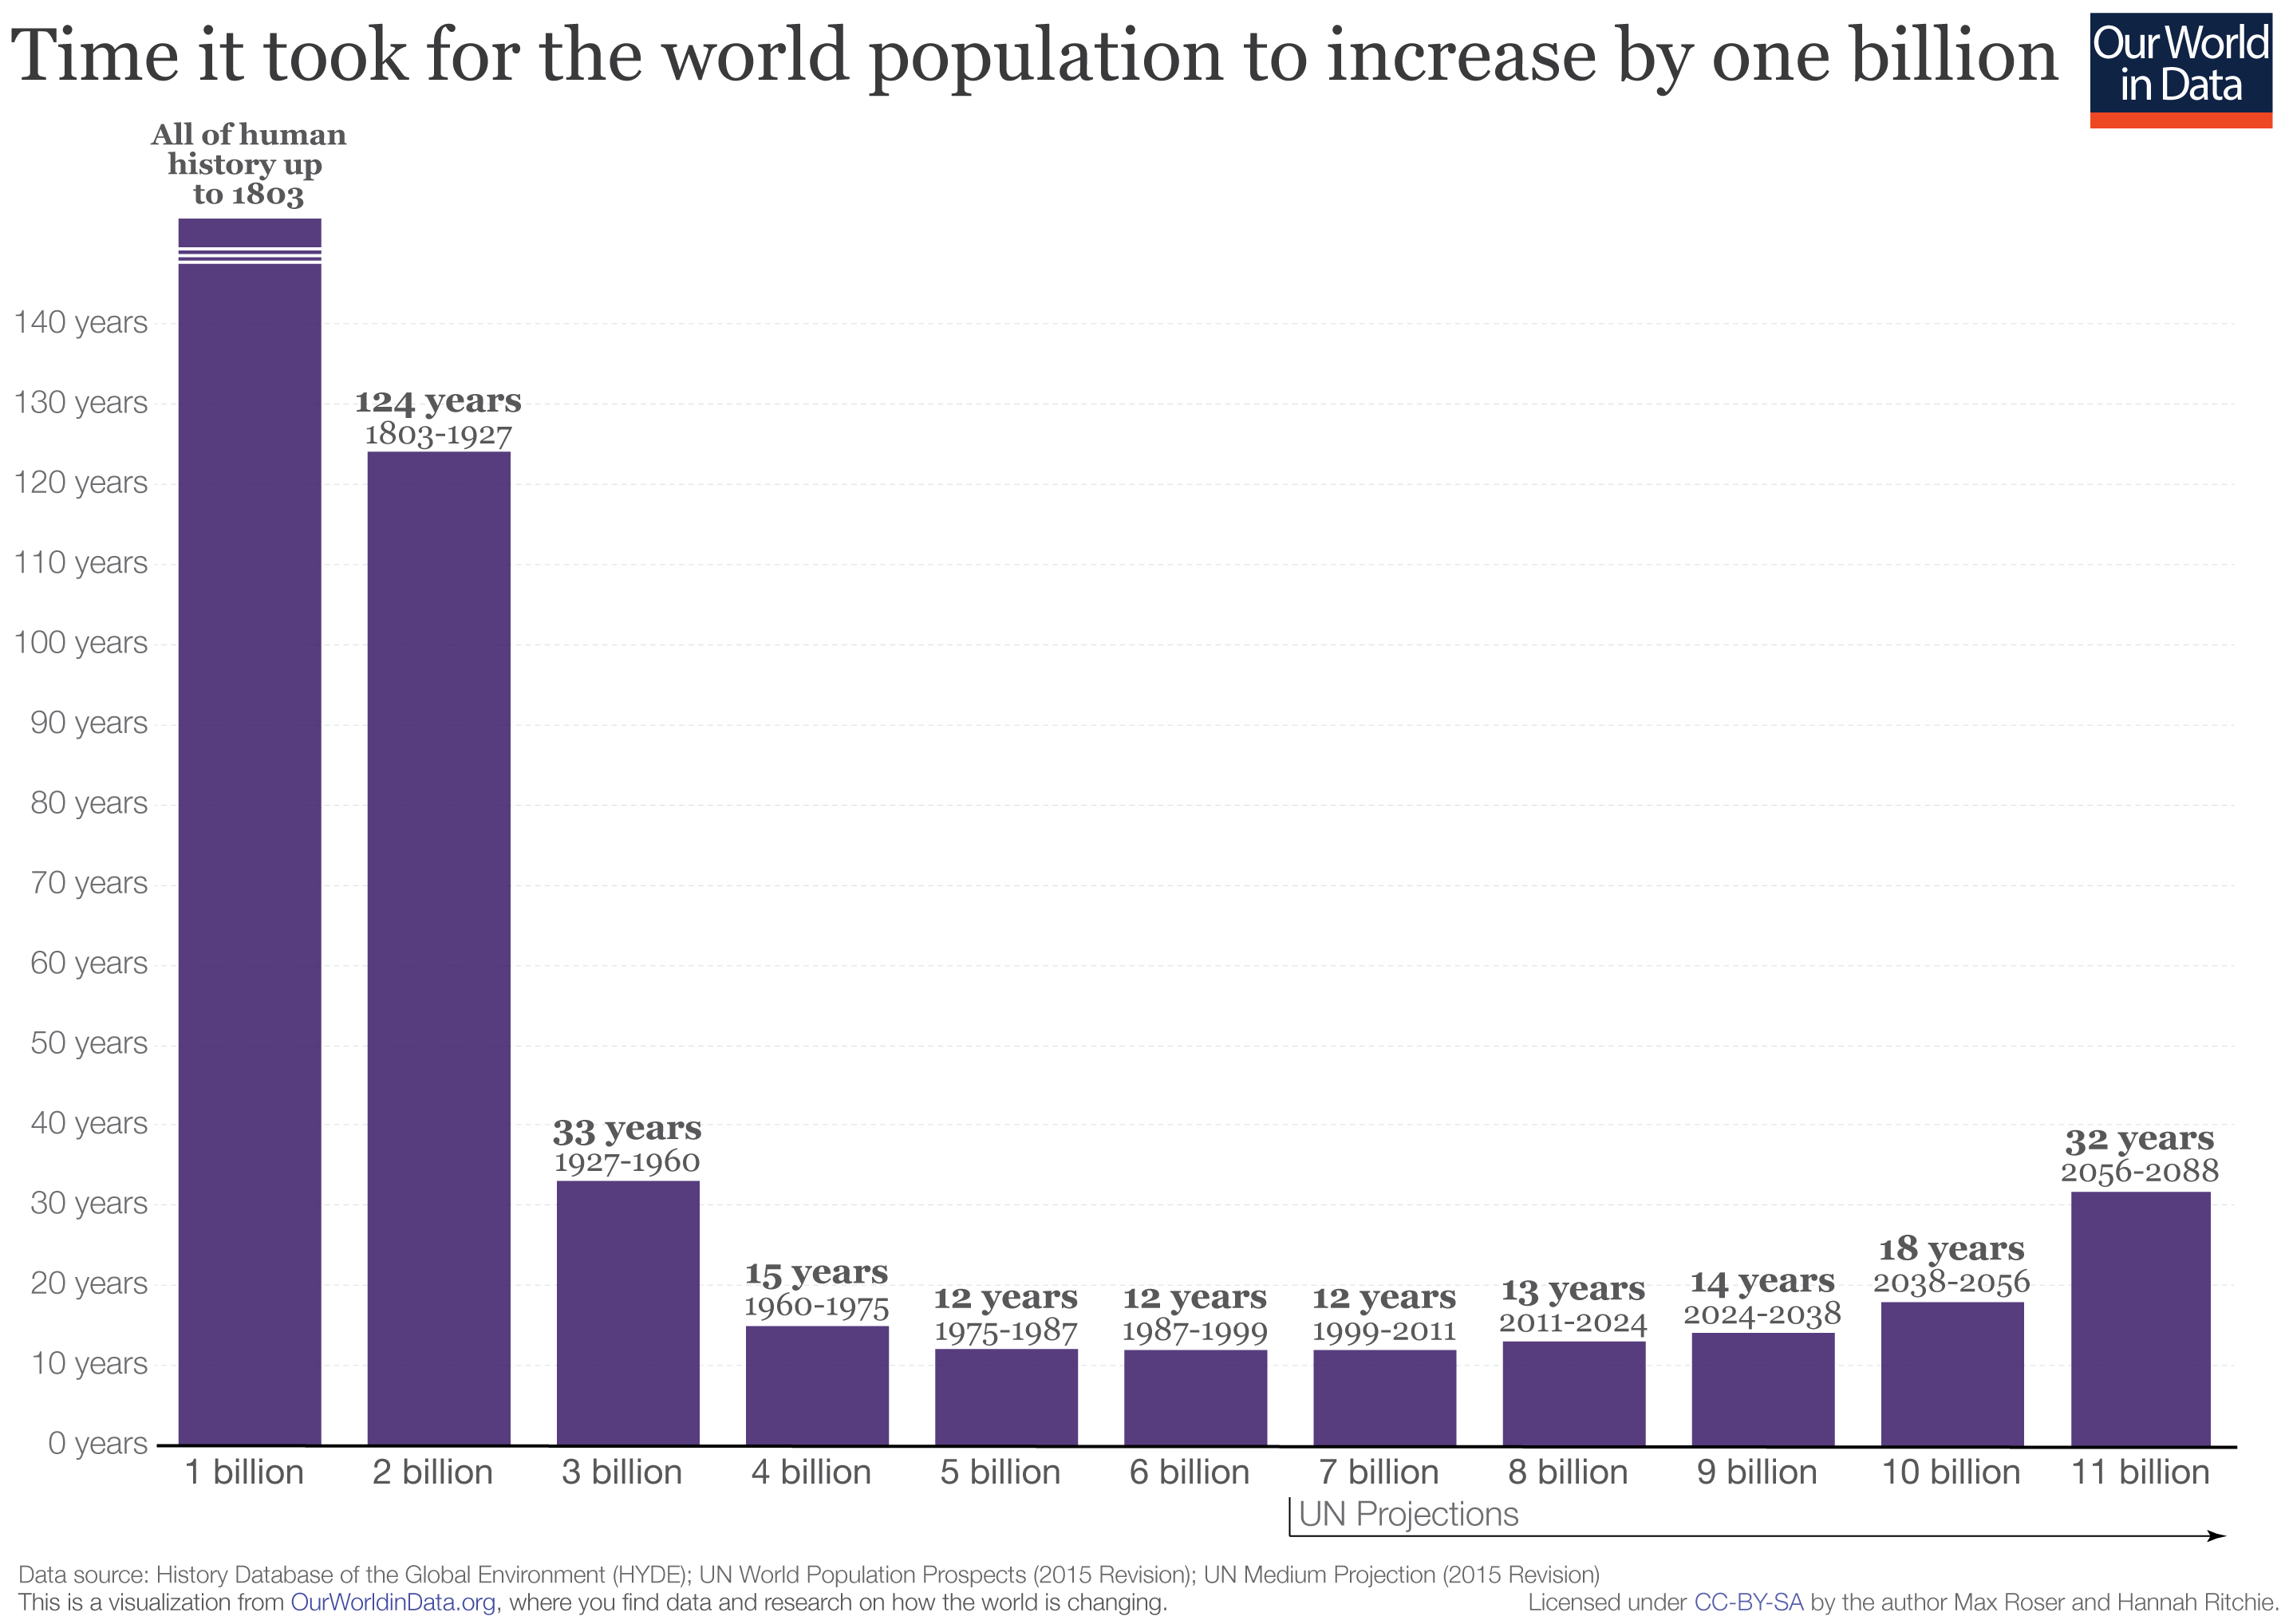 Time to Add 1 Billion in Population